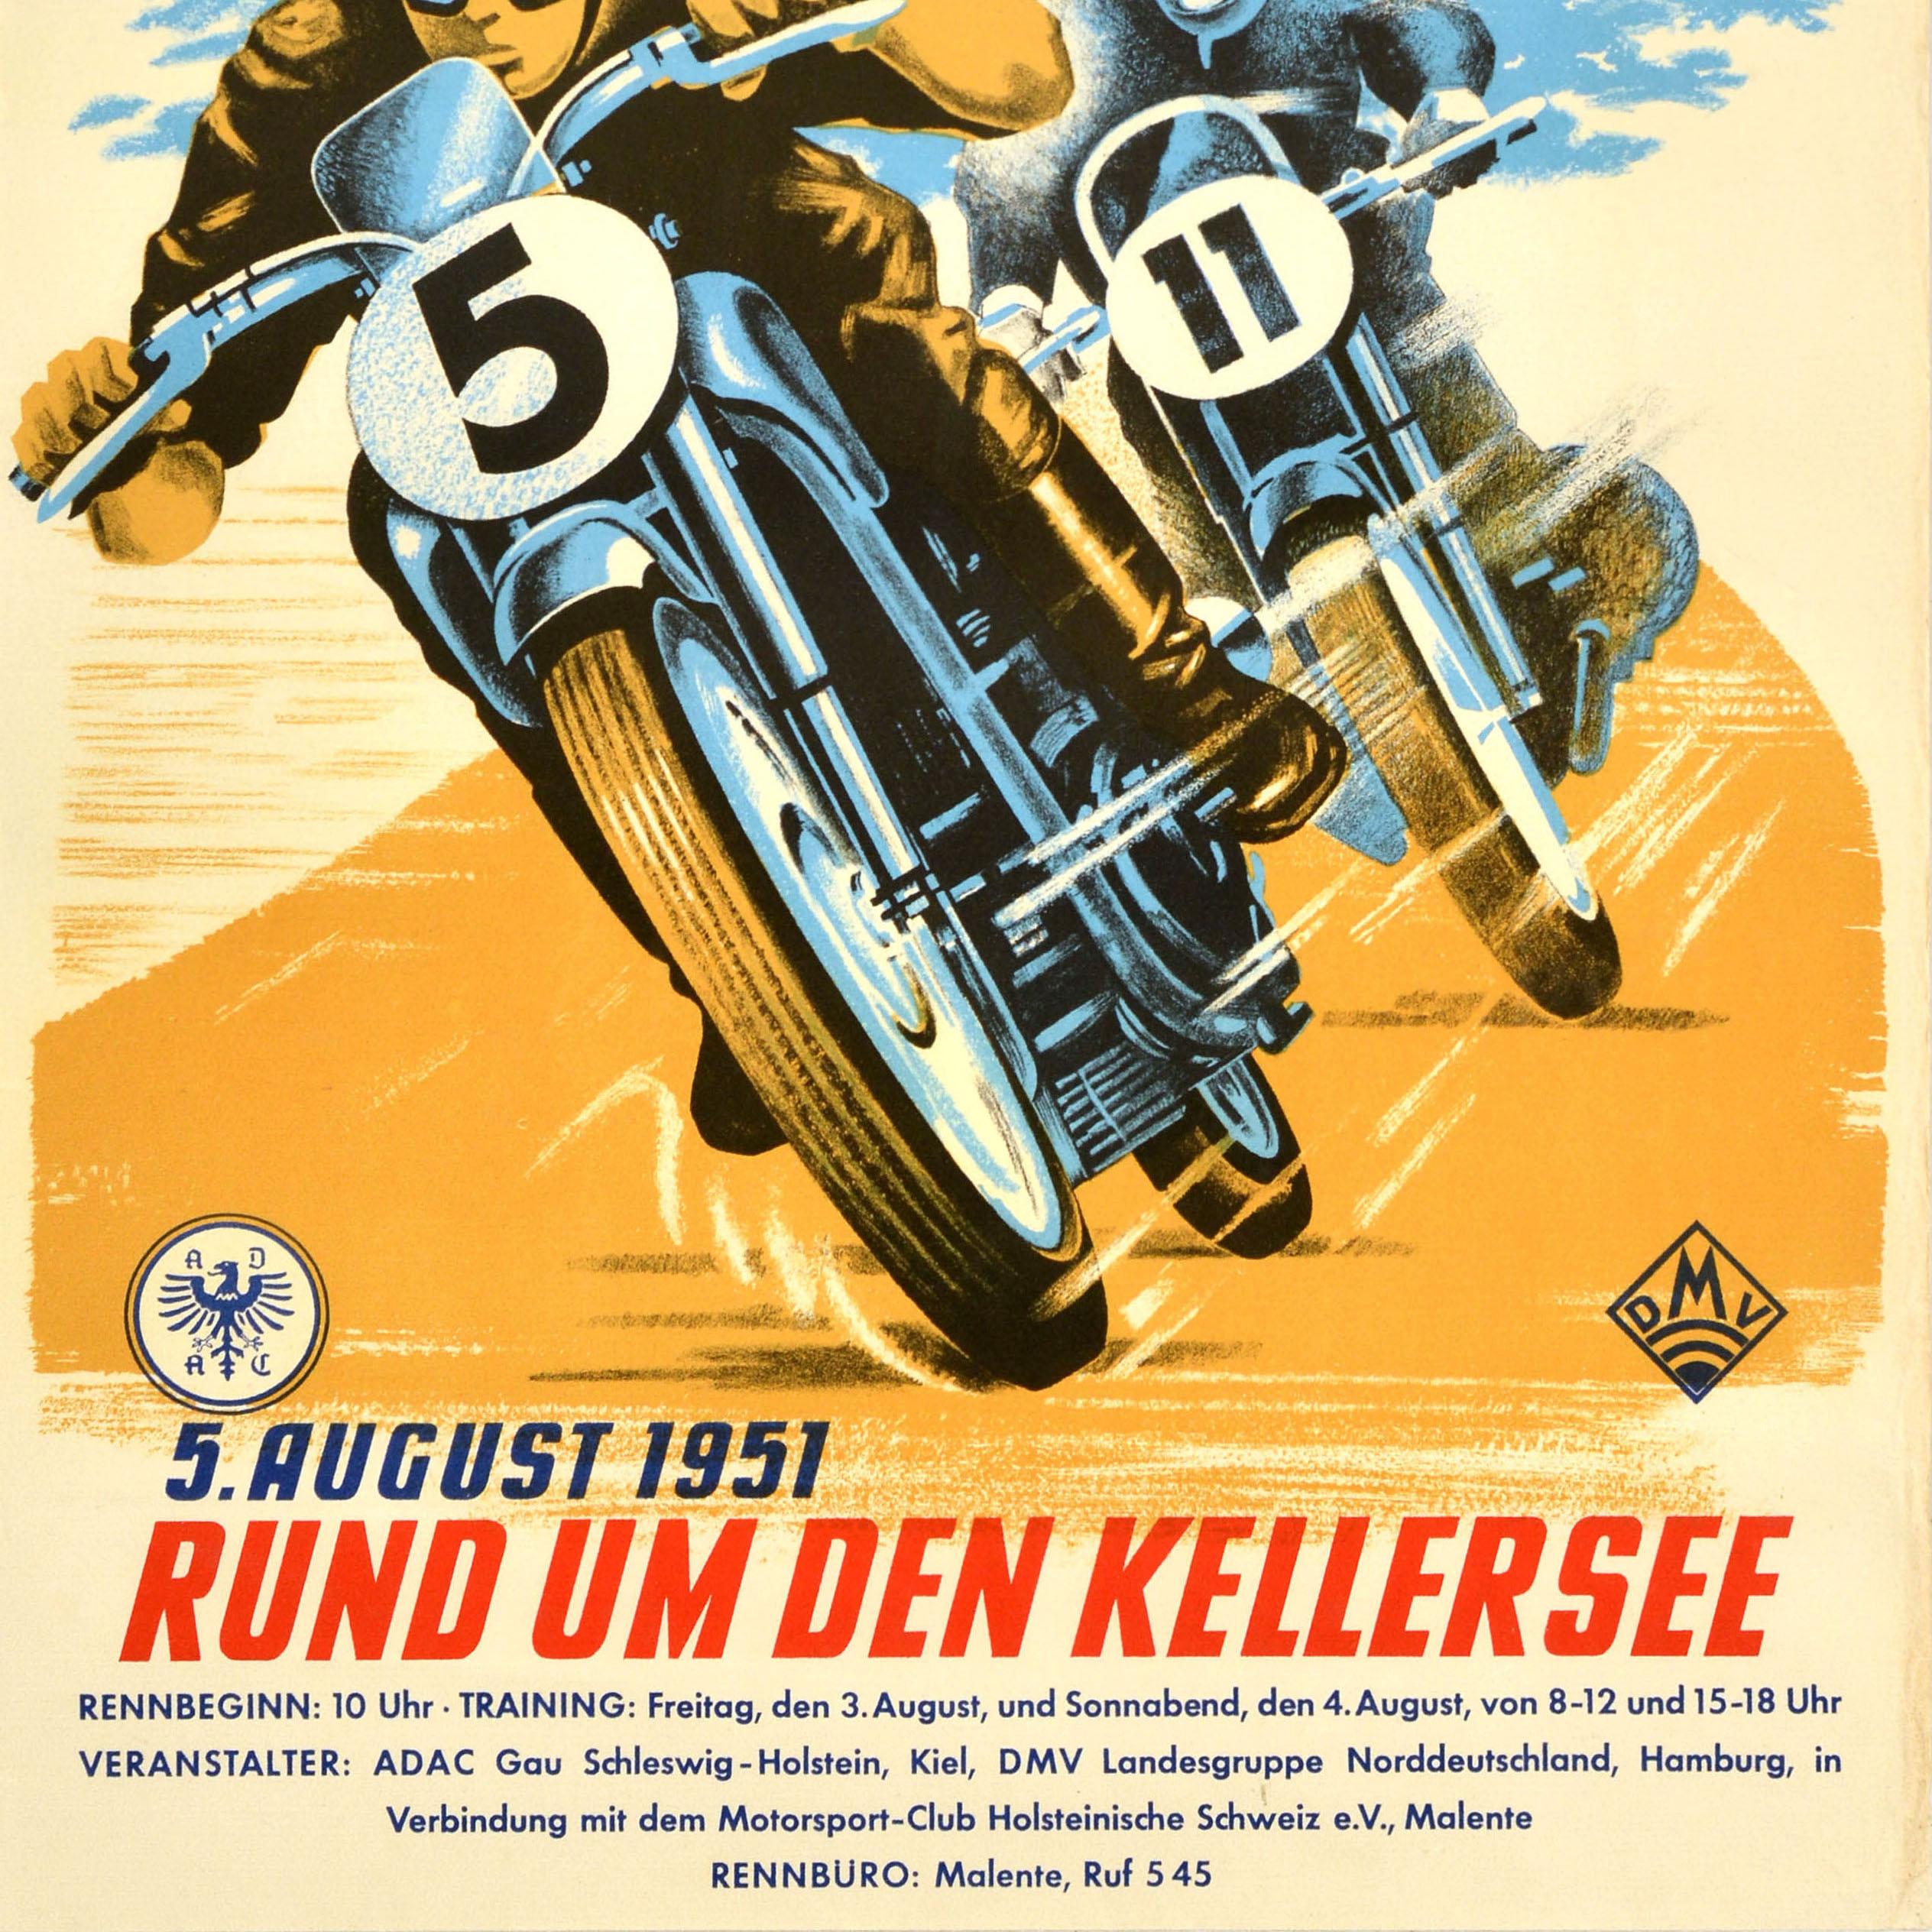 Original vintage advertising for a race sponsored by Pheonix Reifen Rund um den Kellersee / Phoenix Tyres around Kellersee Lake on 5 August 1951 - featuring a colourful design showing two motorcyclists on blue motorbikes racing around the corner on